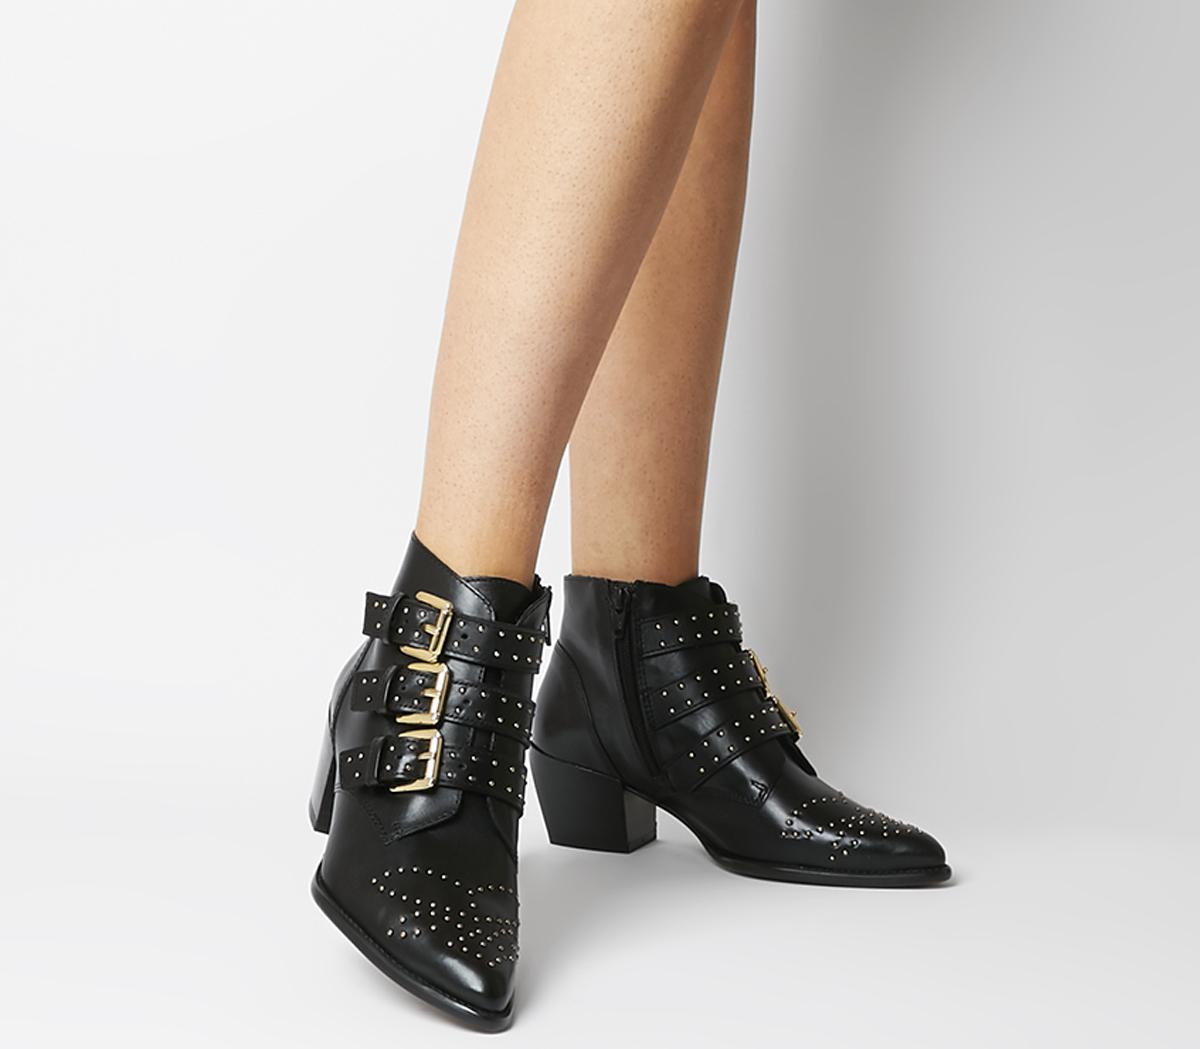 black ankle boots with gold buckles